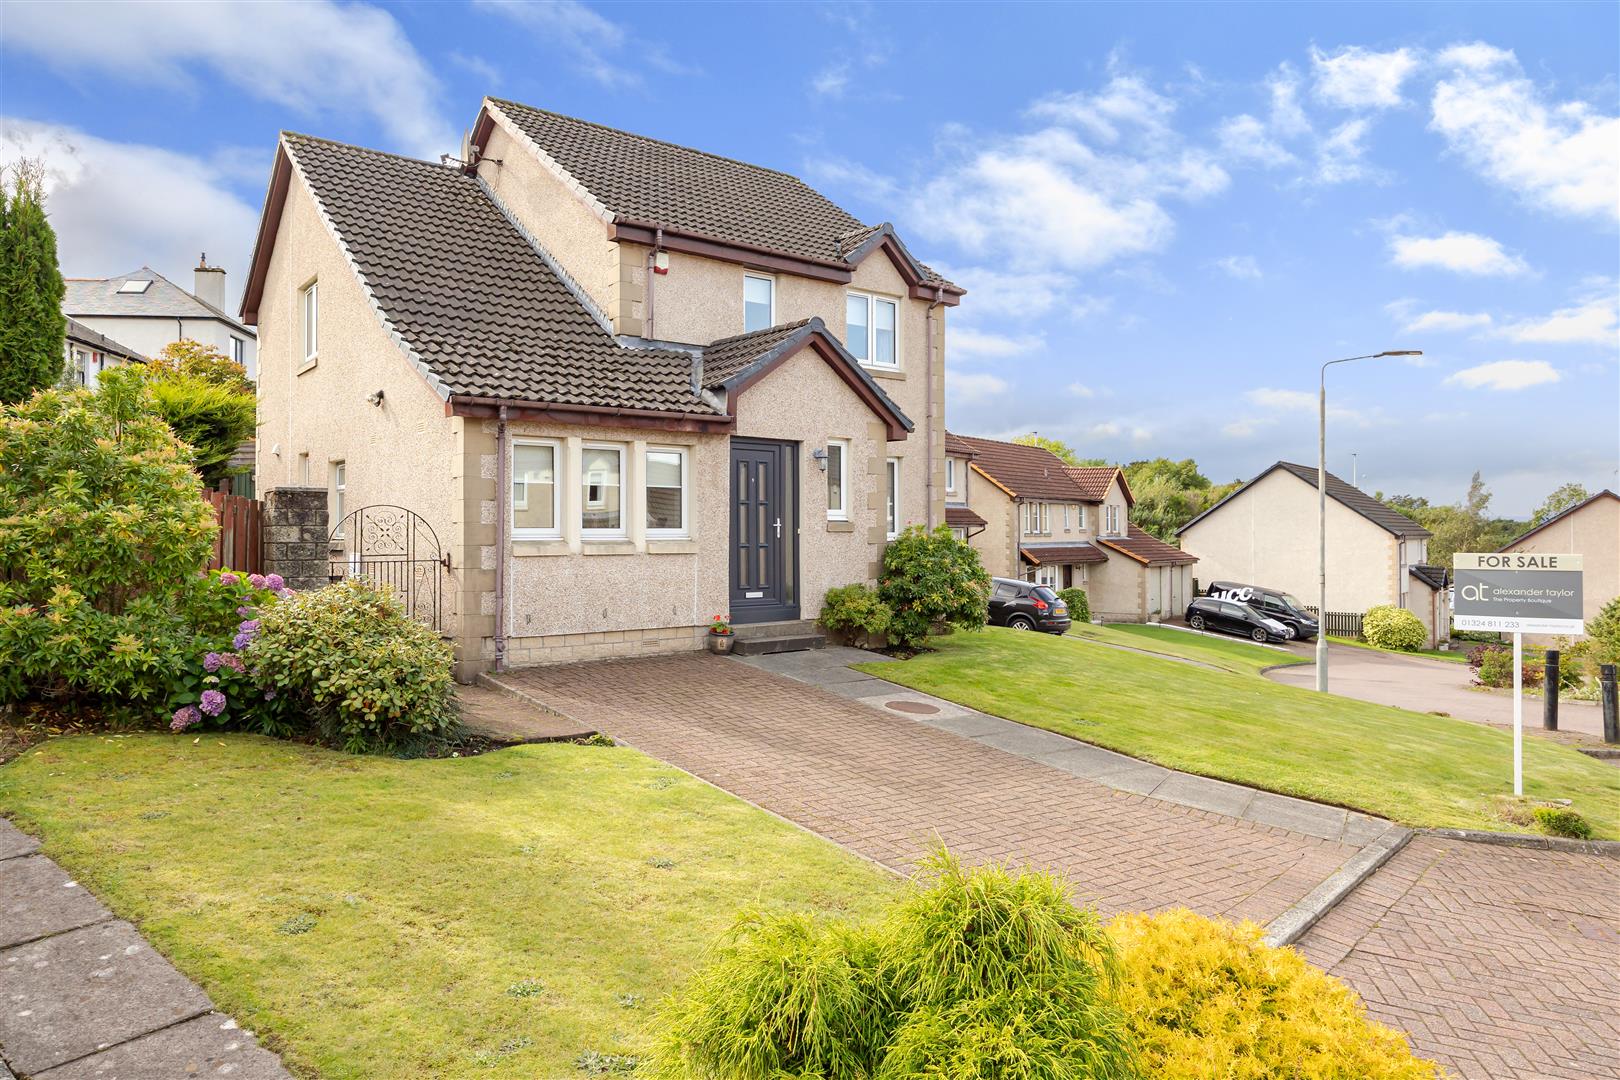 4 bed detached house for sale in Mckell Court, Falkirk 0